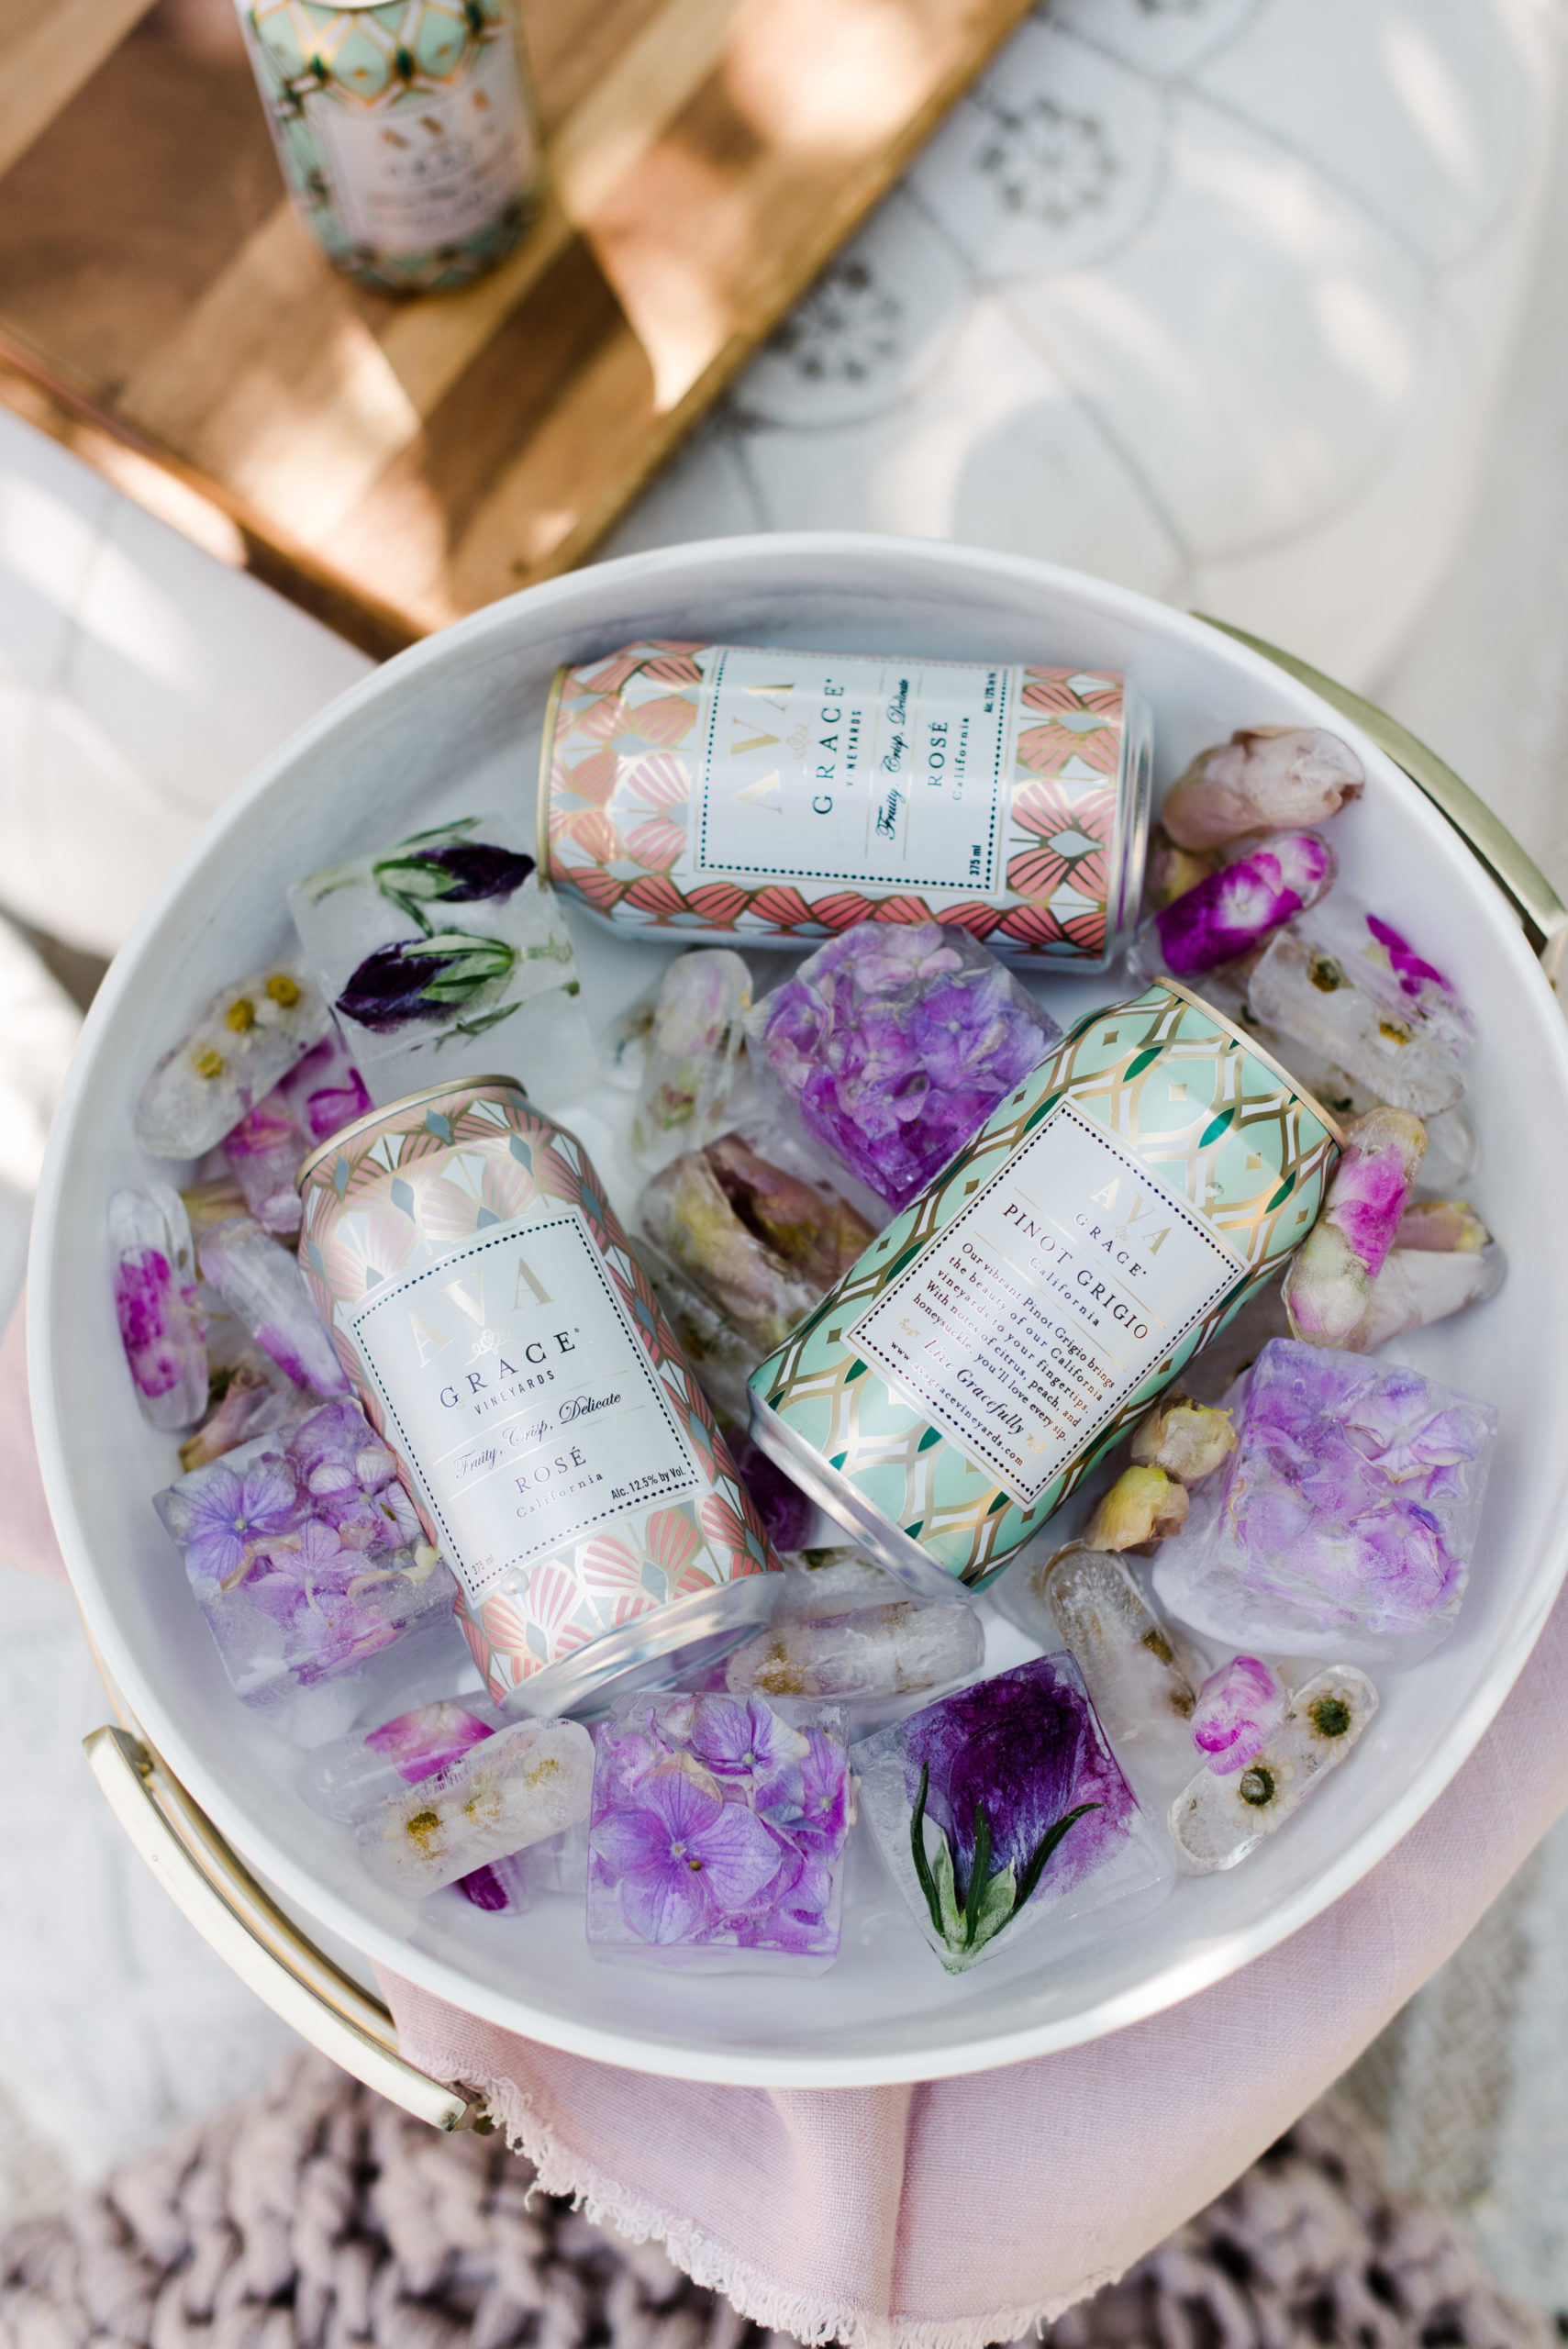 Can of AVA Grace wines in an ice bucket with beautiful floral ice cubes.